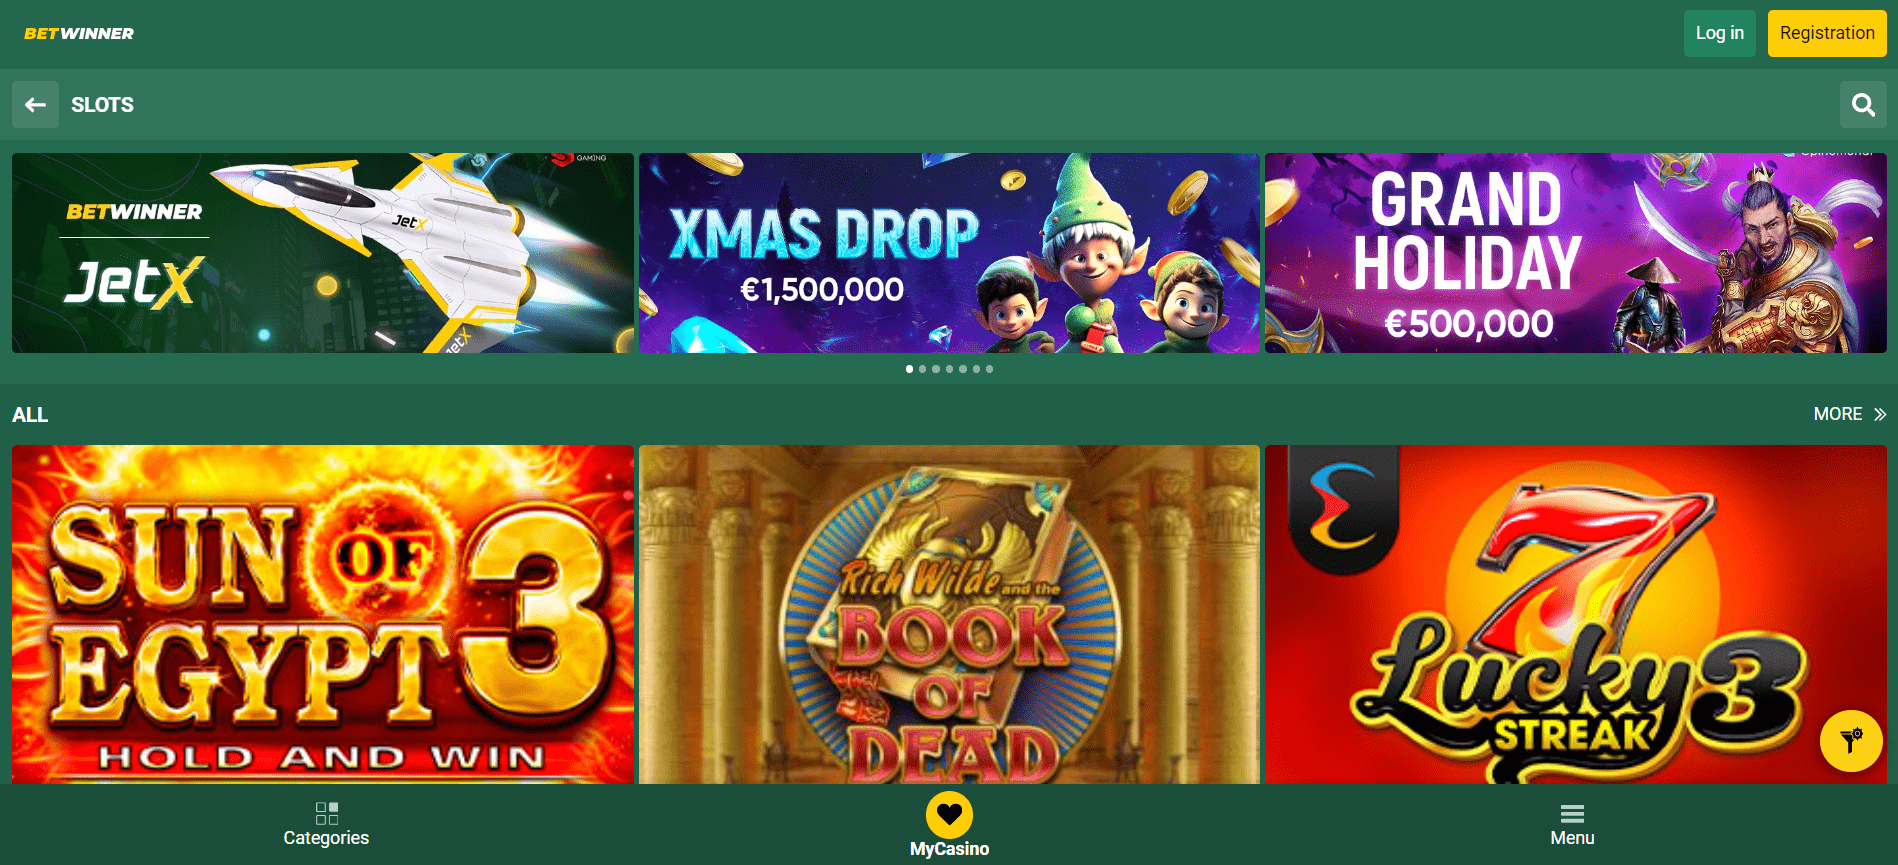 Betwinner Online Casino - Pay Attentions To These 25 Signals